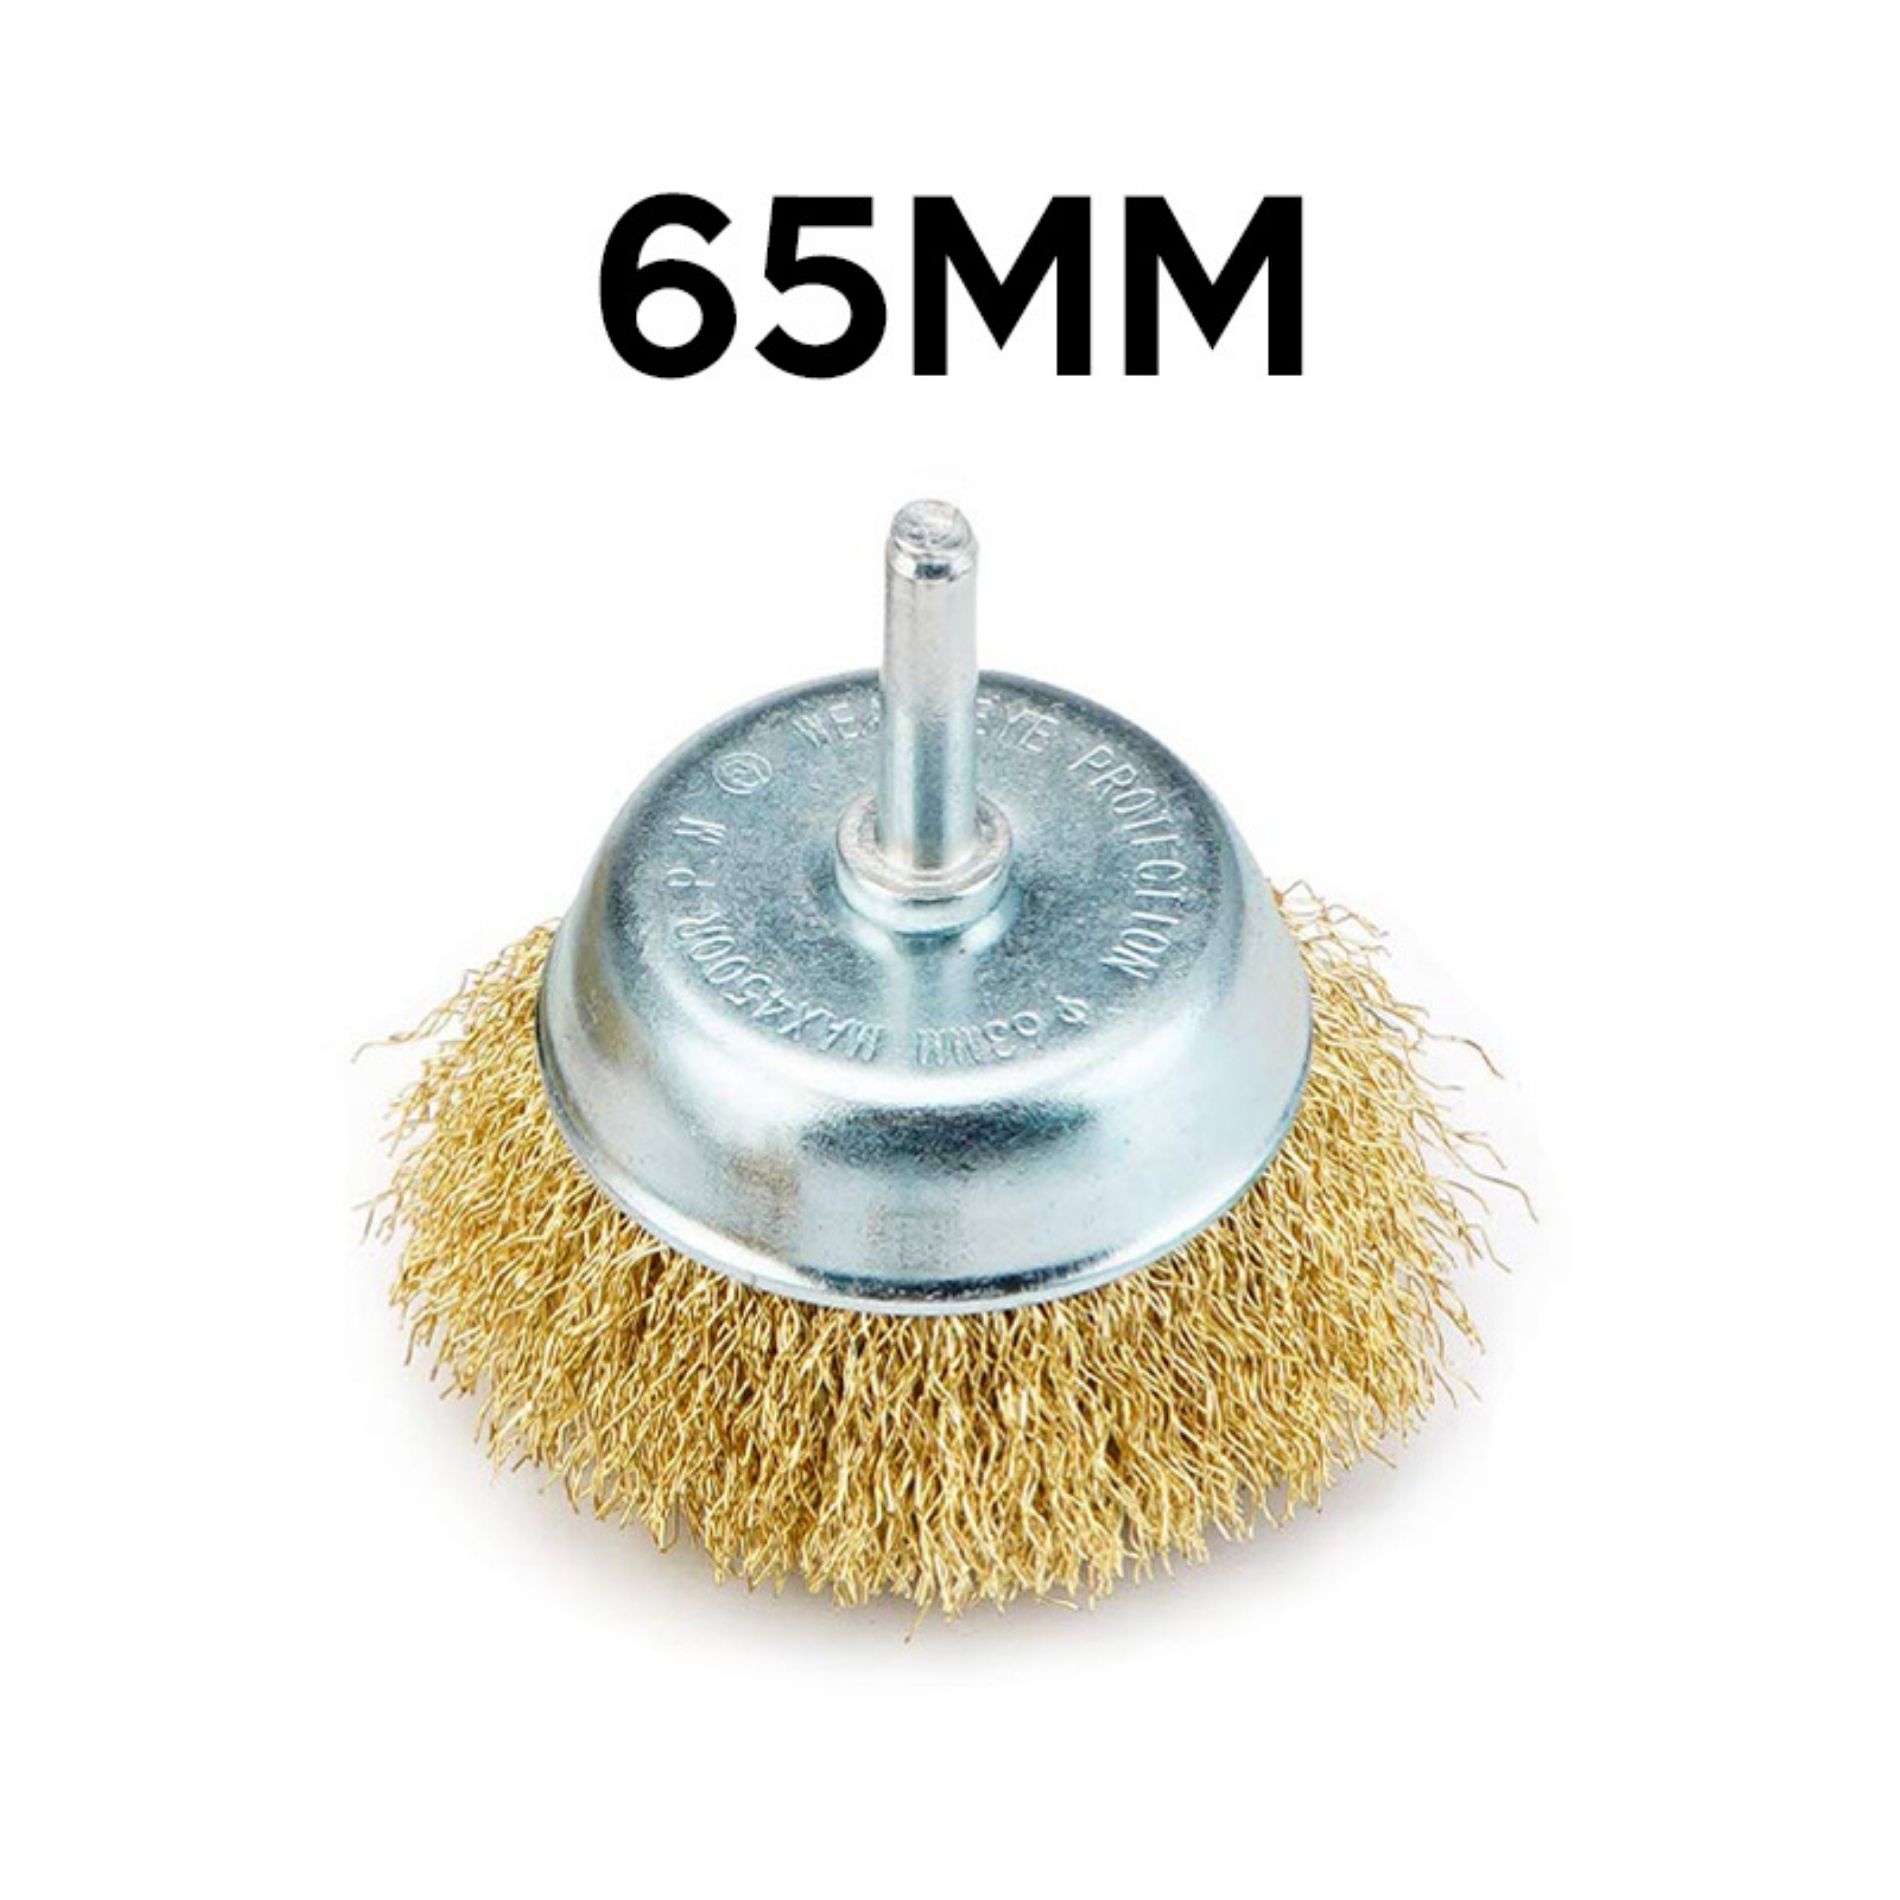 Brass Wheel brush Cup Brush End Brush With 1/4 Inch Shank For Wood Grinding Rust Paint Removal Polish